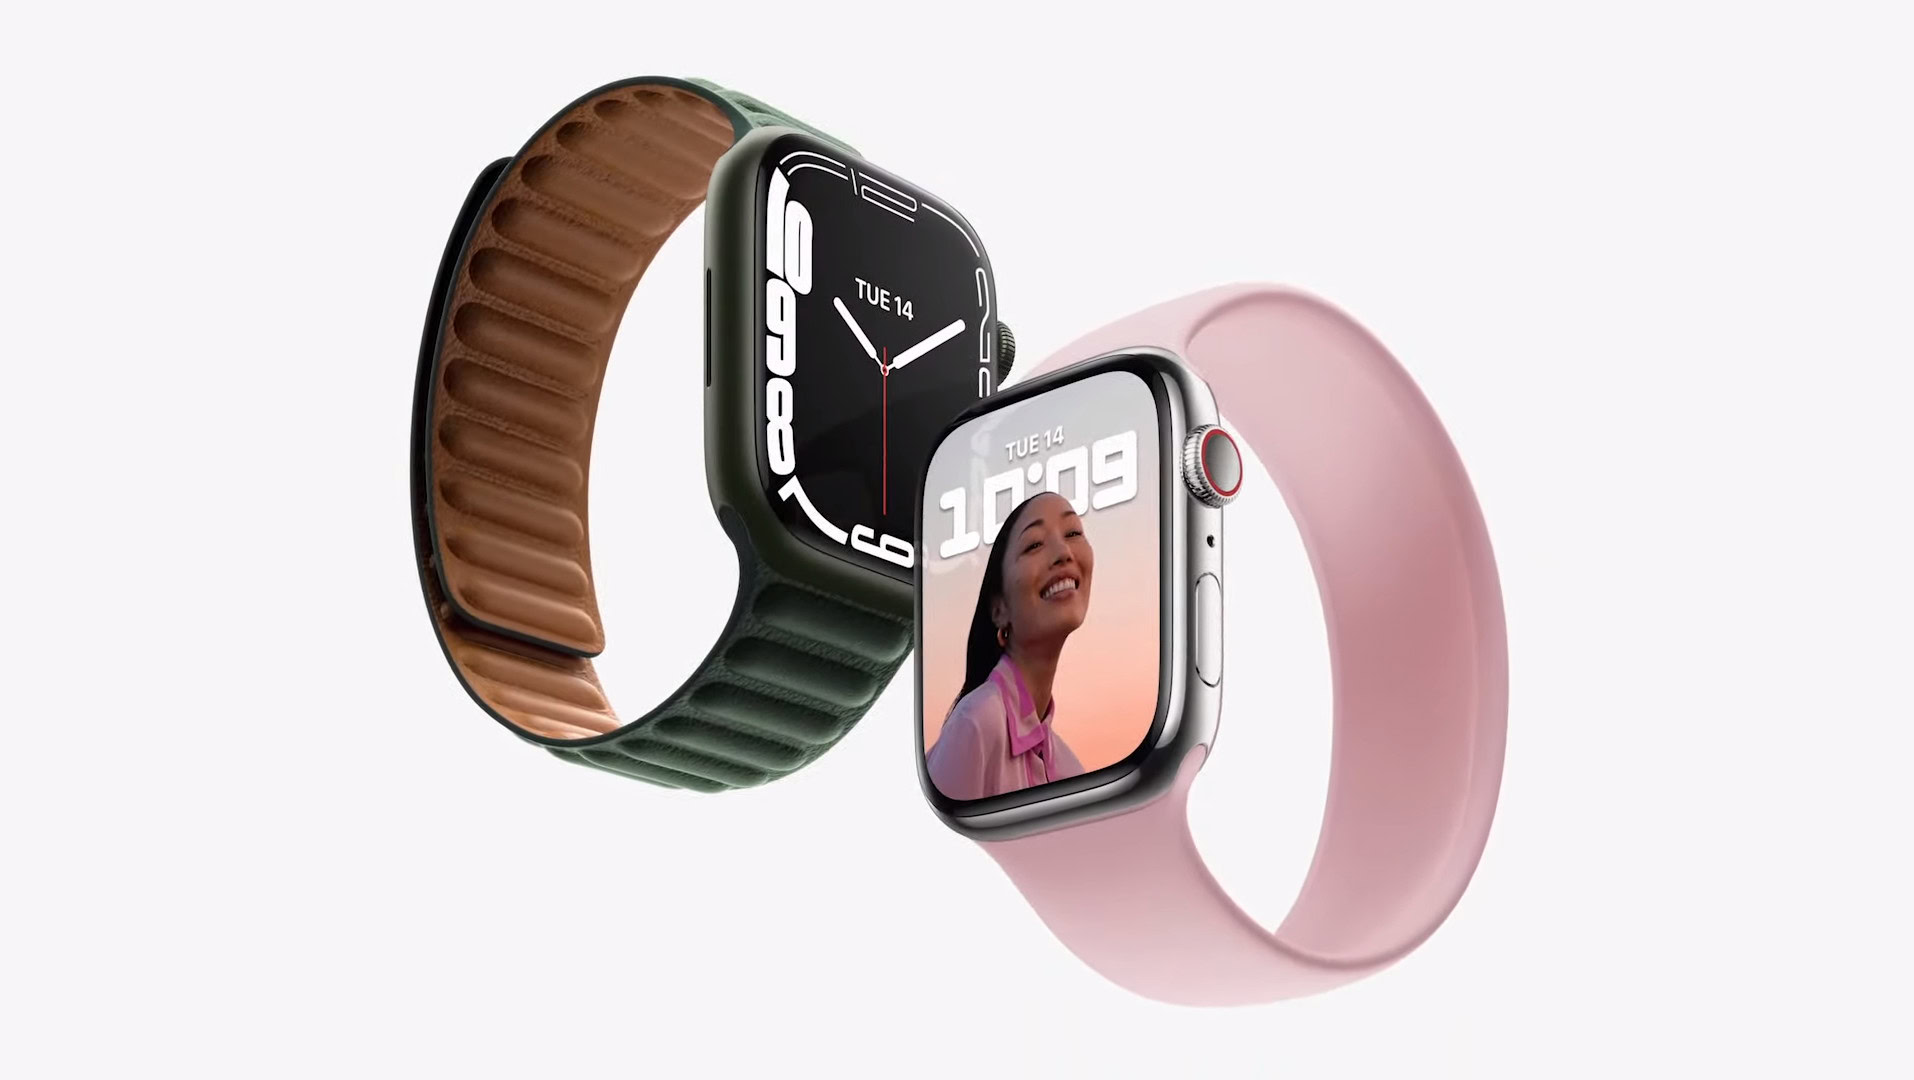 Apple Watch Series 7 announced: Apple's smartwatch gets better - Authority